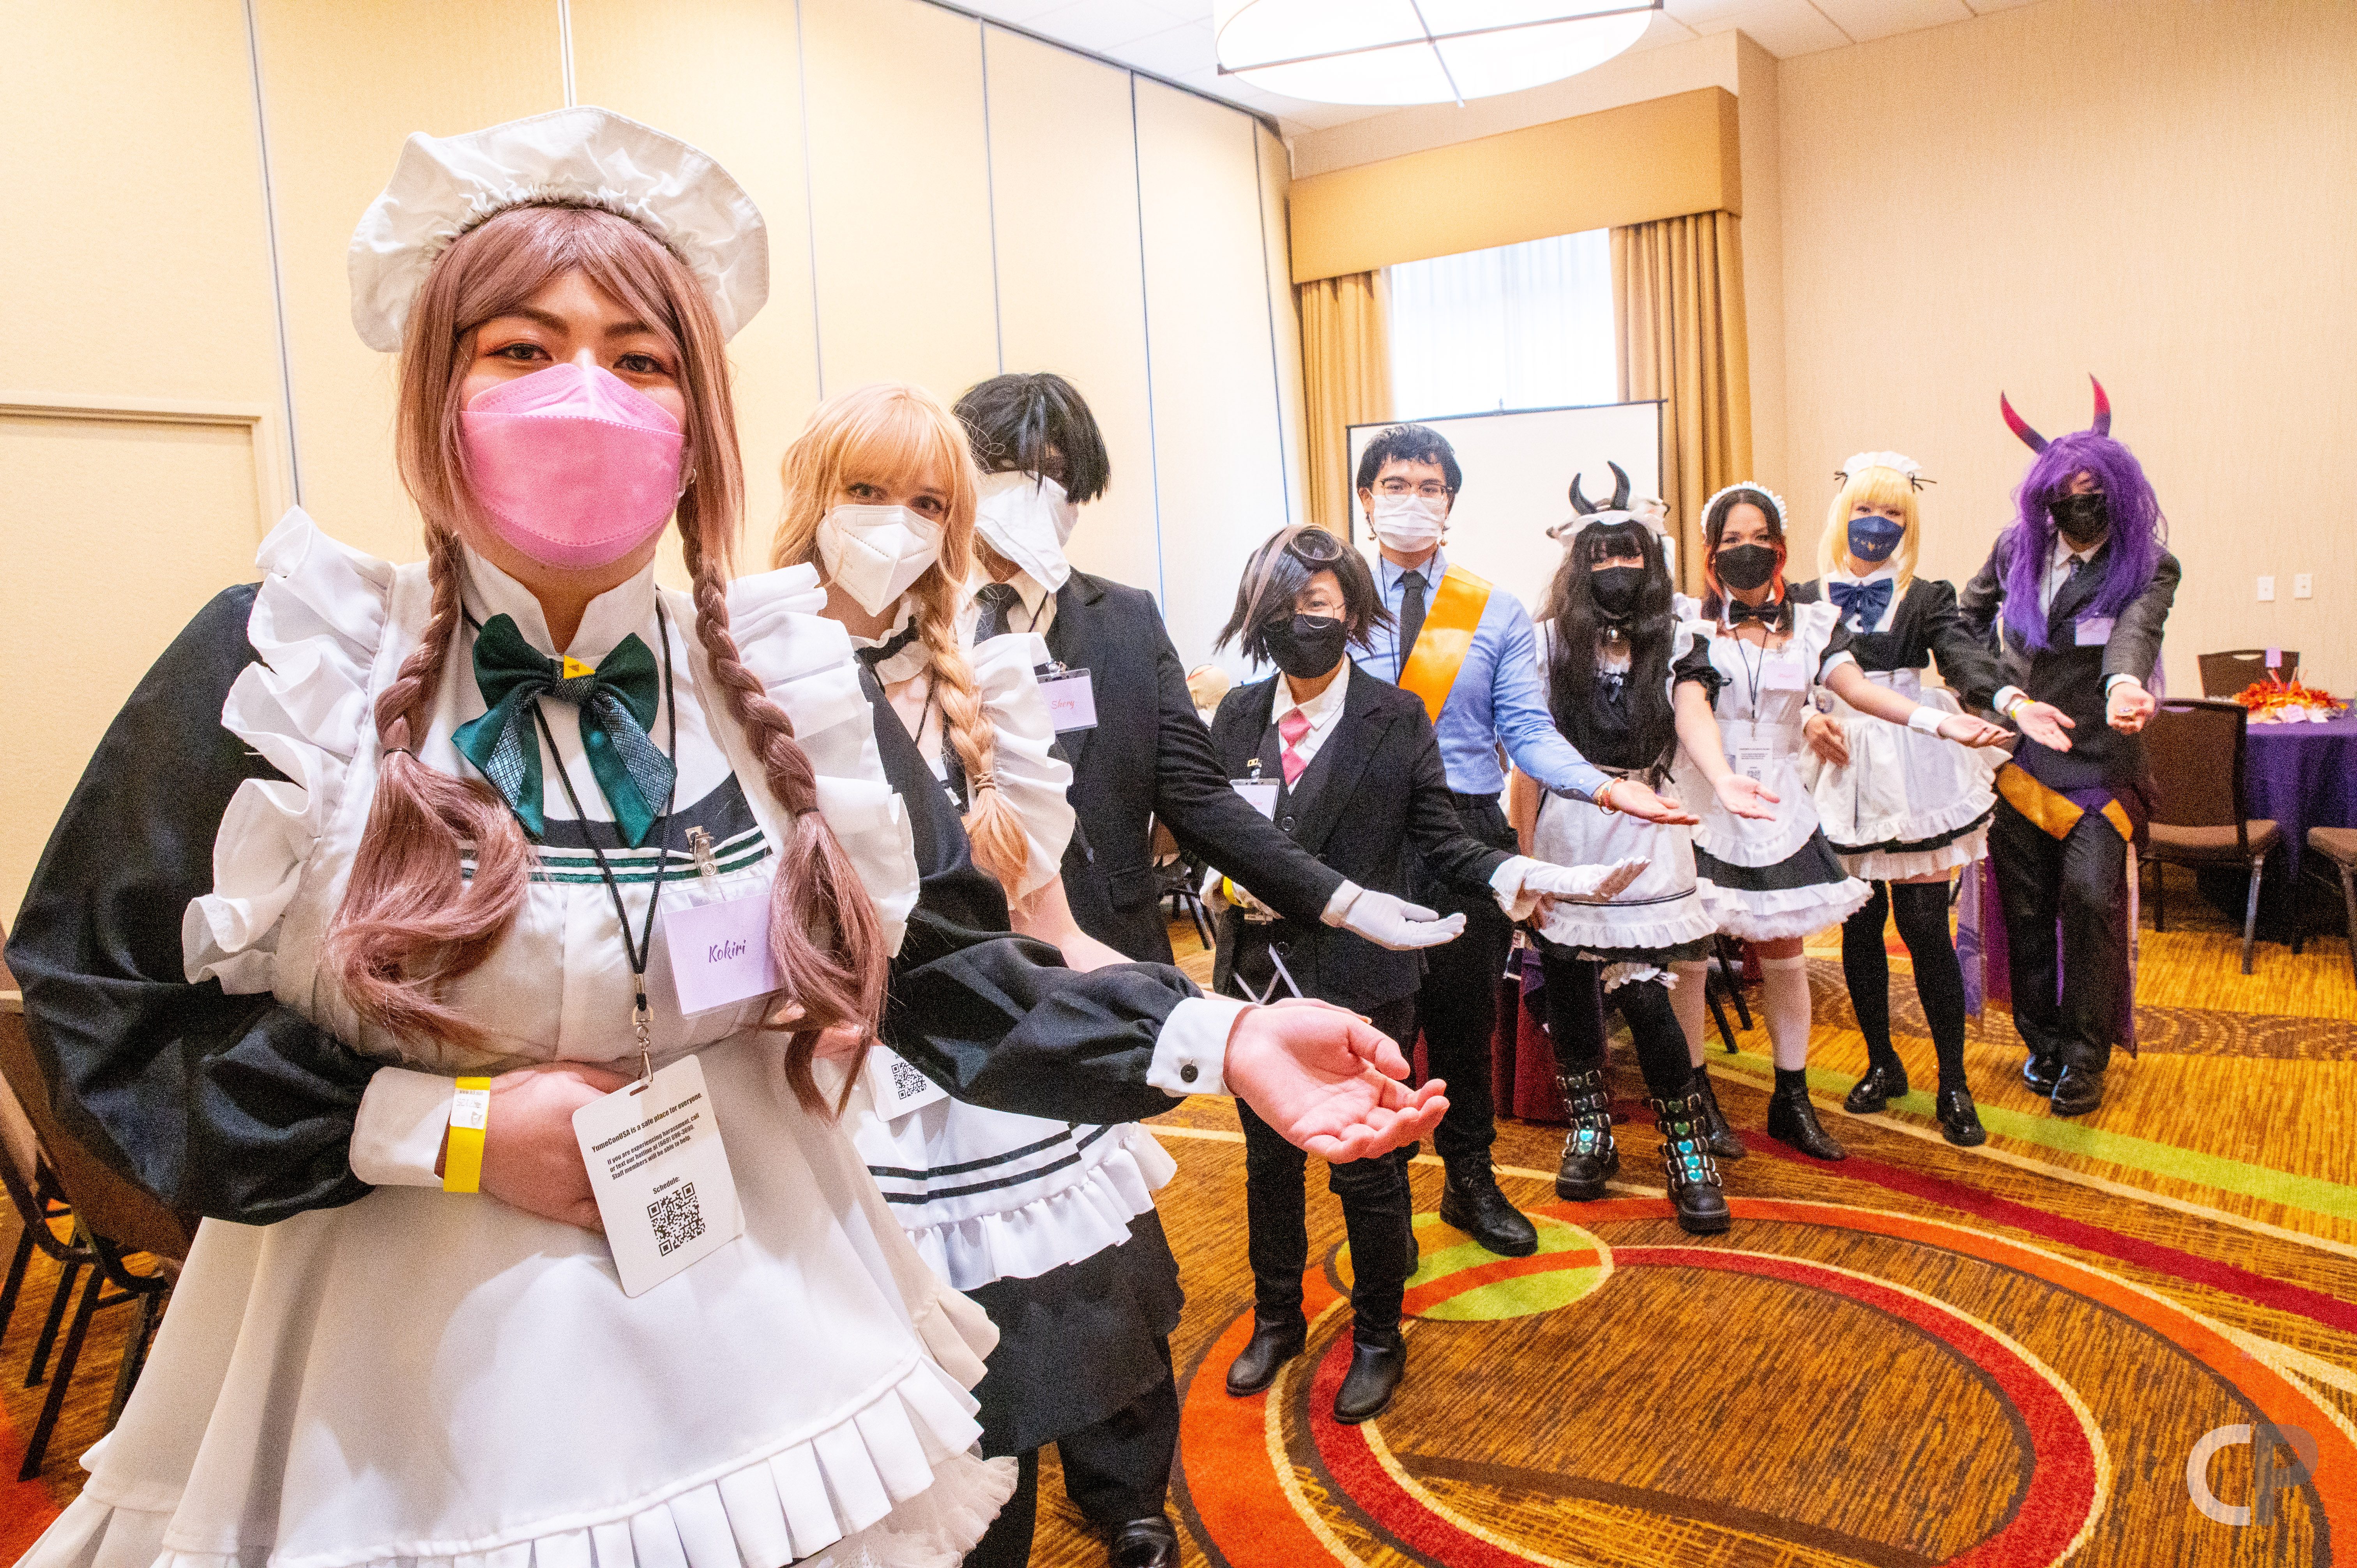 Maids and Butlers in YumeConUSA's Maid and Butler Cafe welcoming customers in.